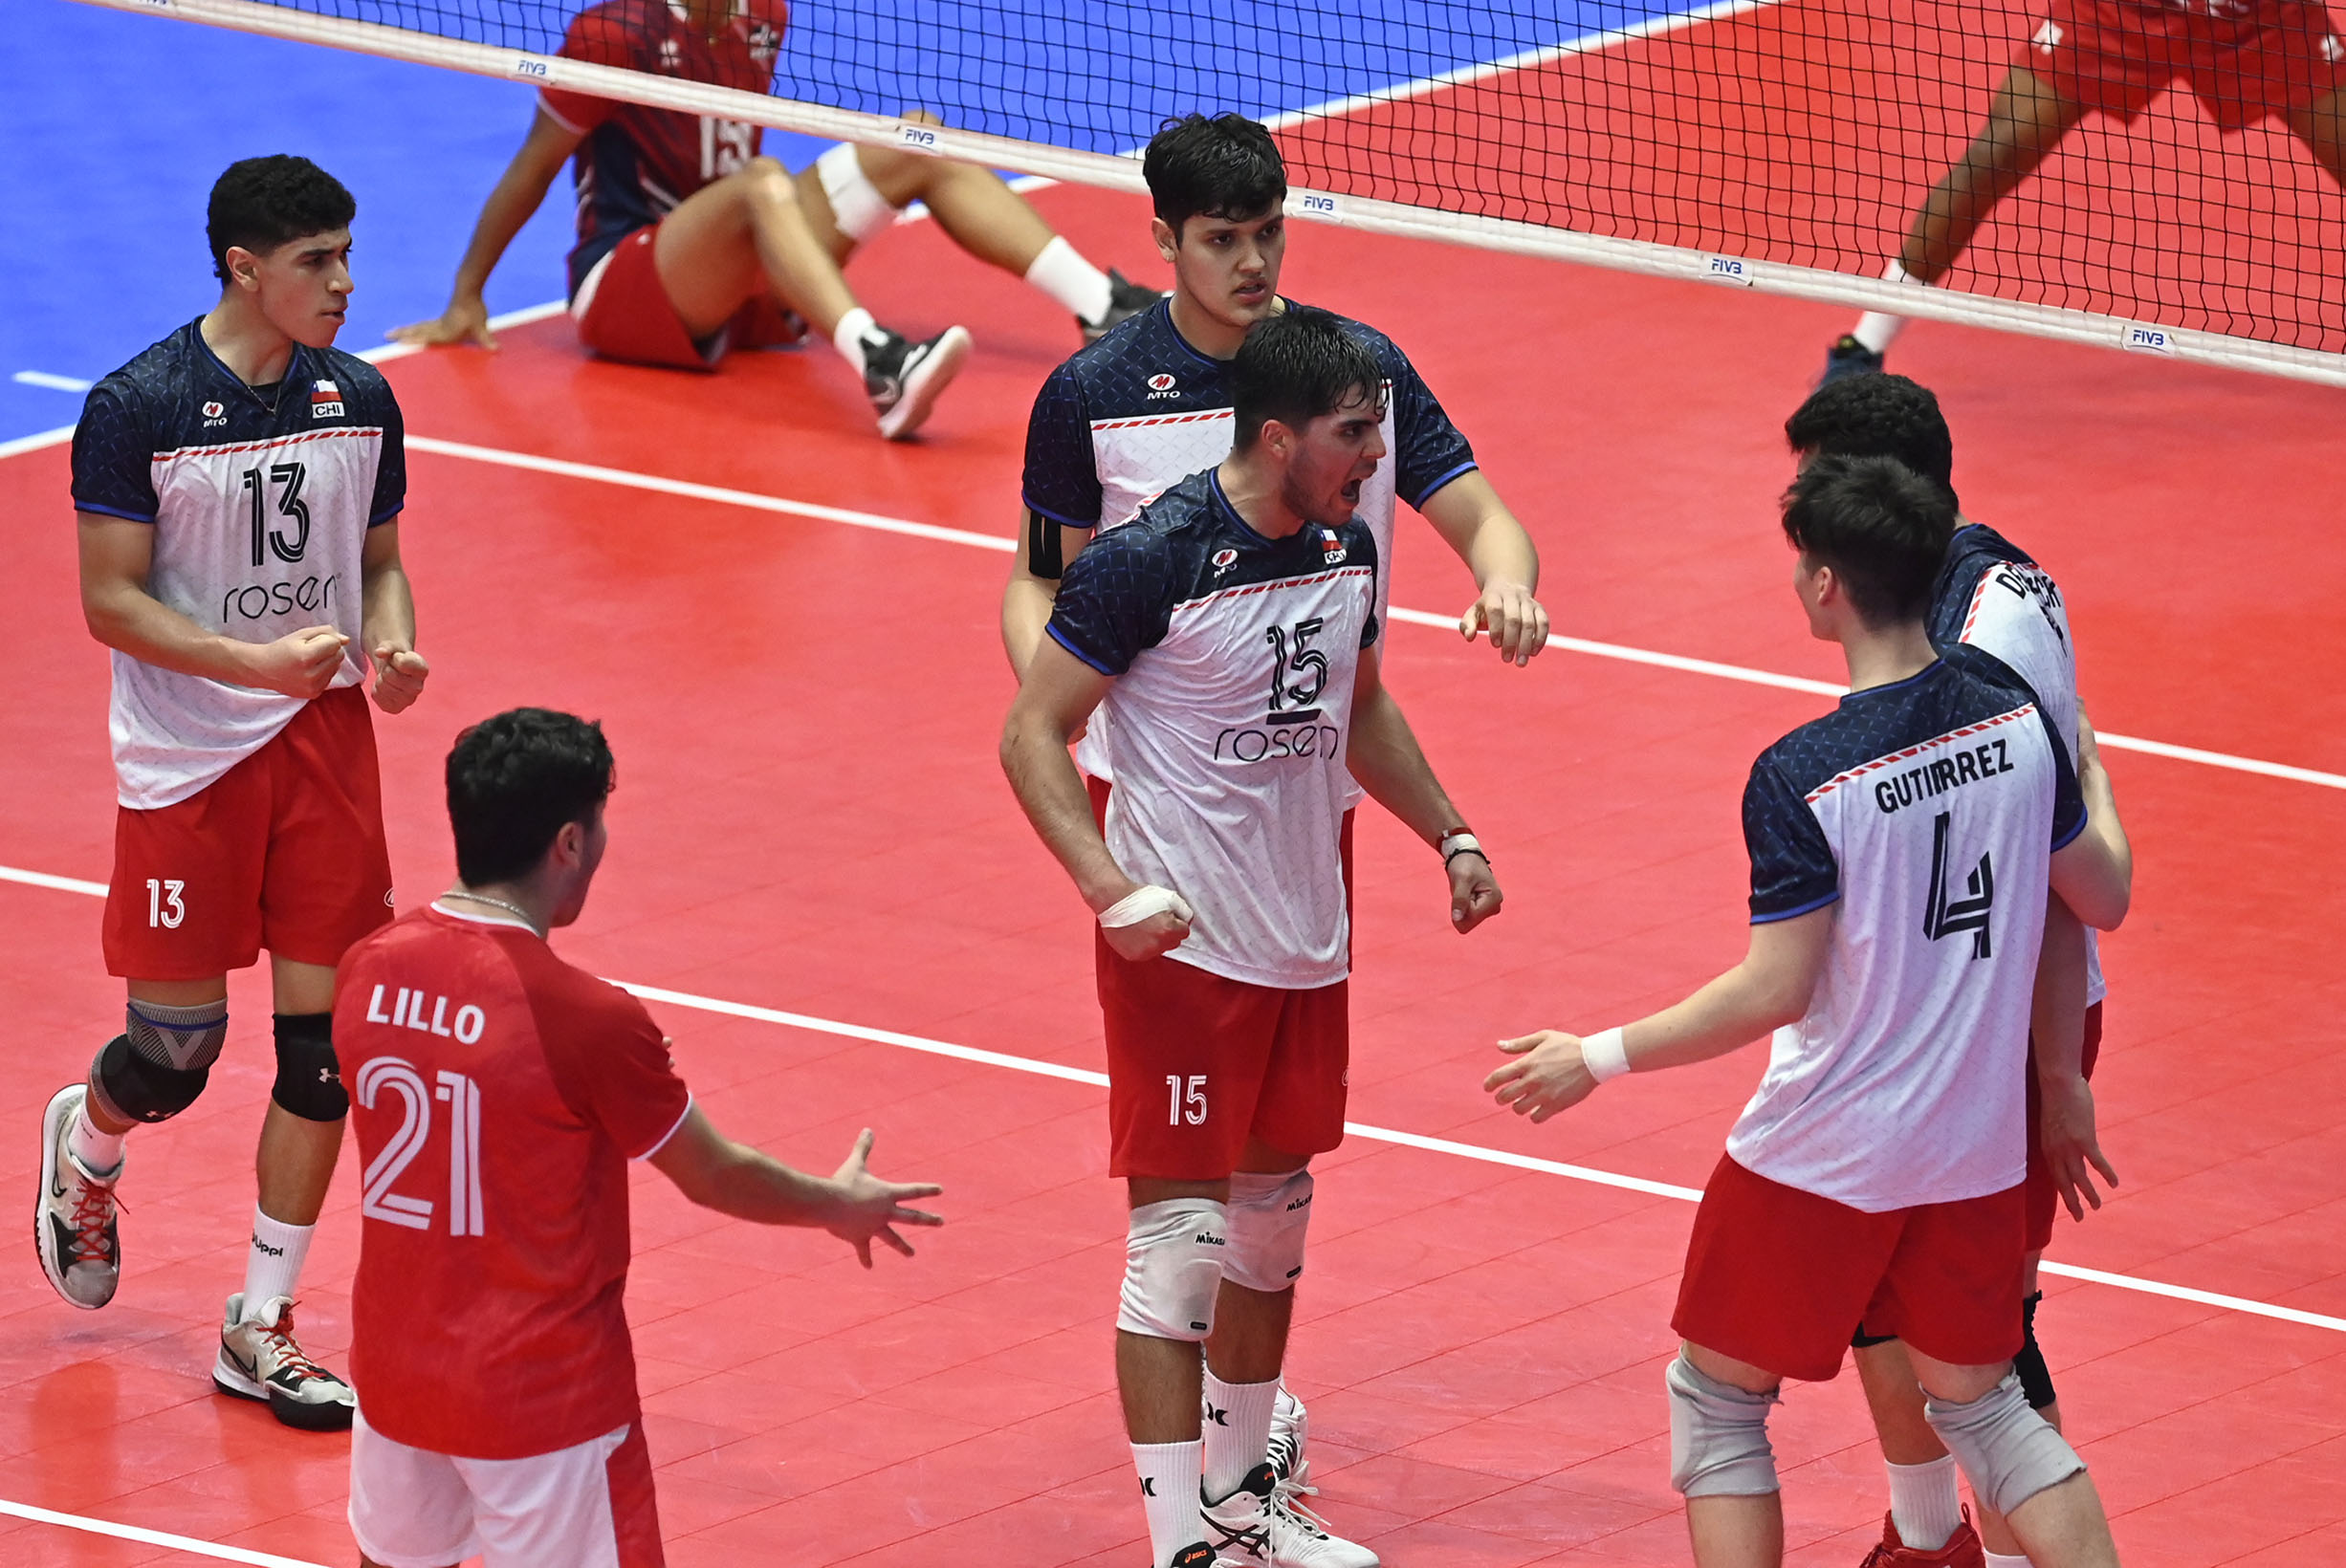 Chile triumphed over Dominican Republic in their U21 Pan American Cup debut